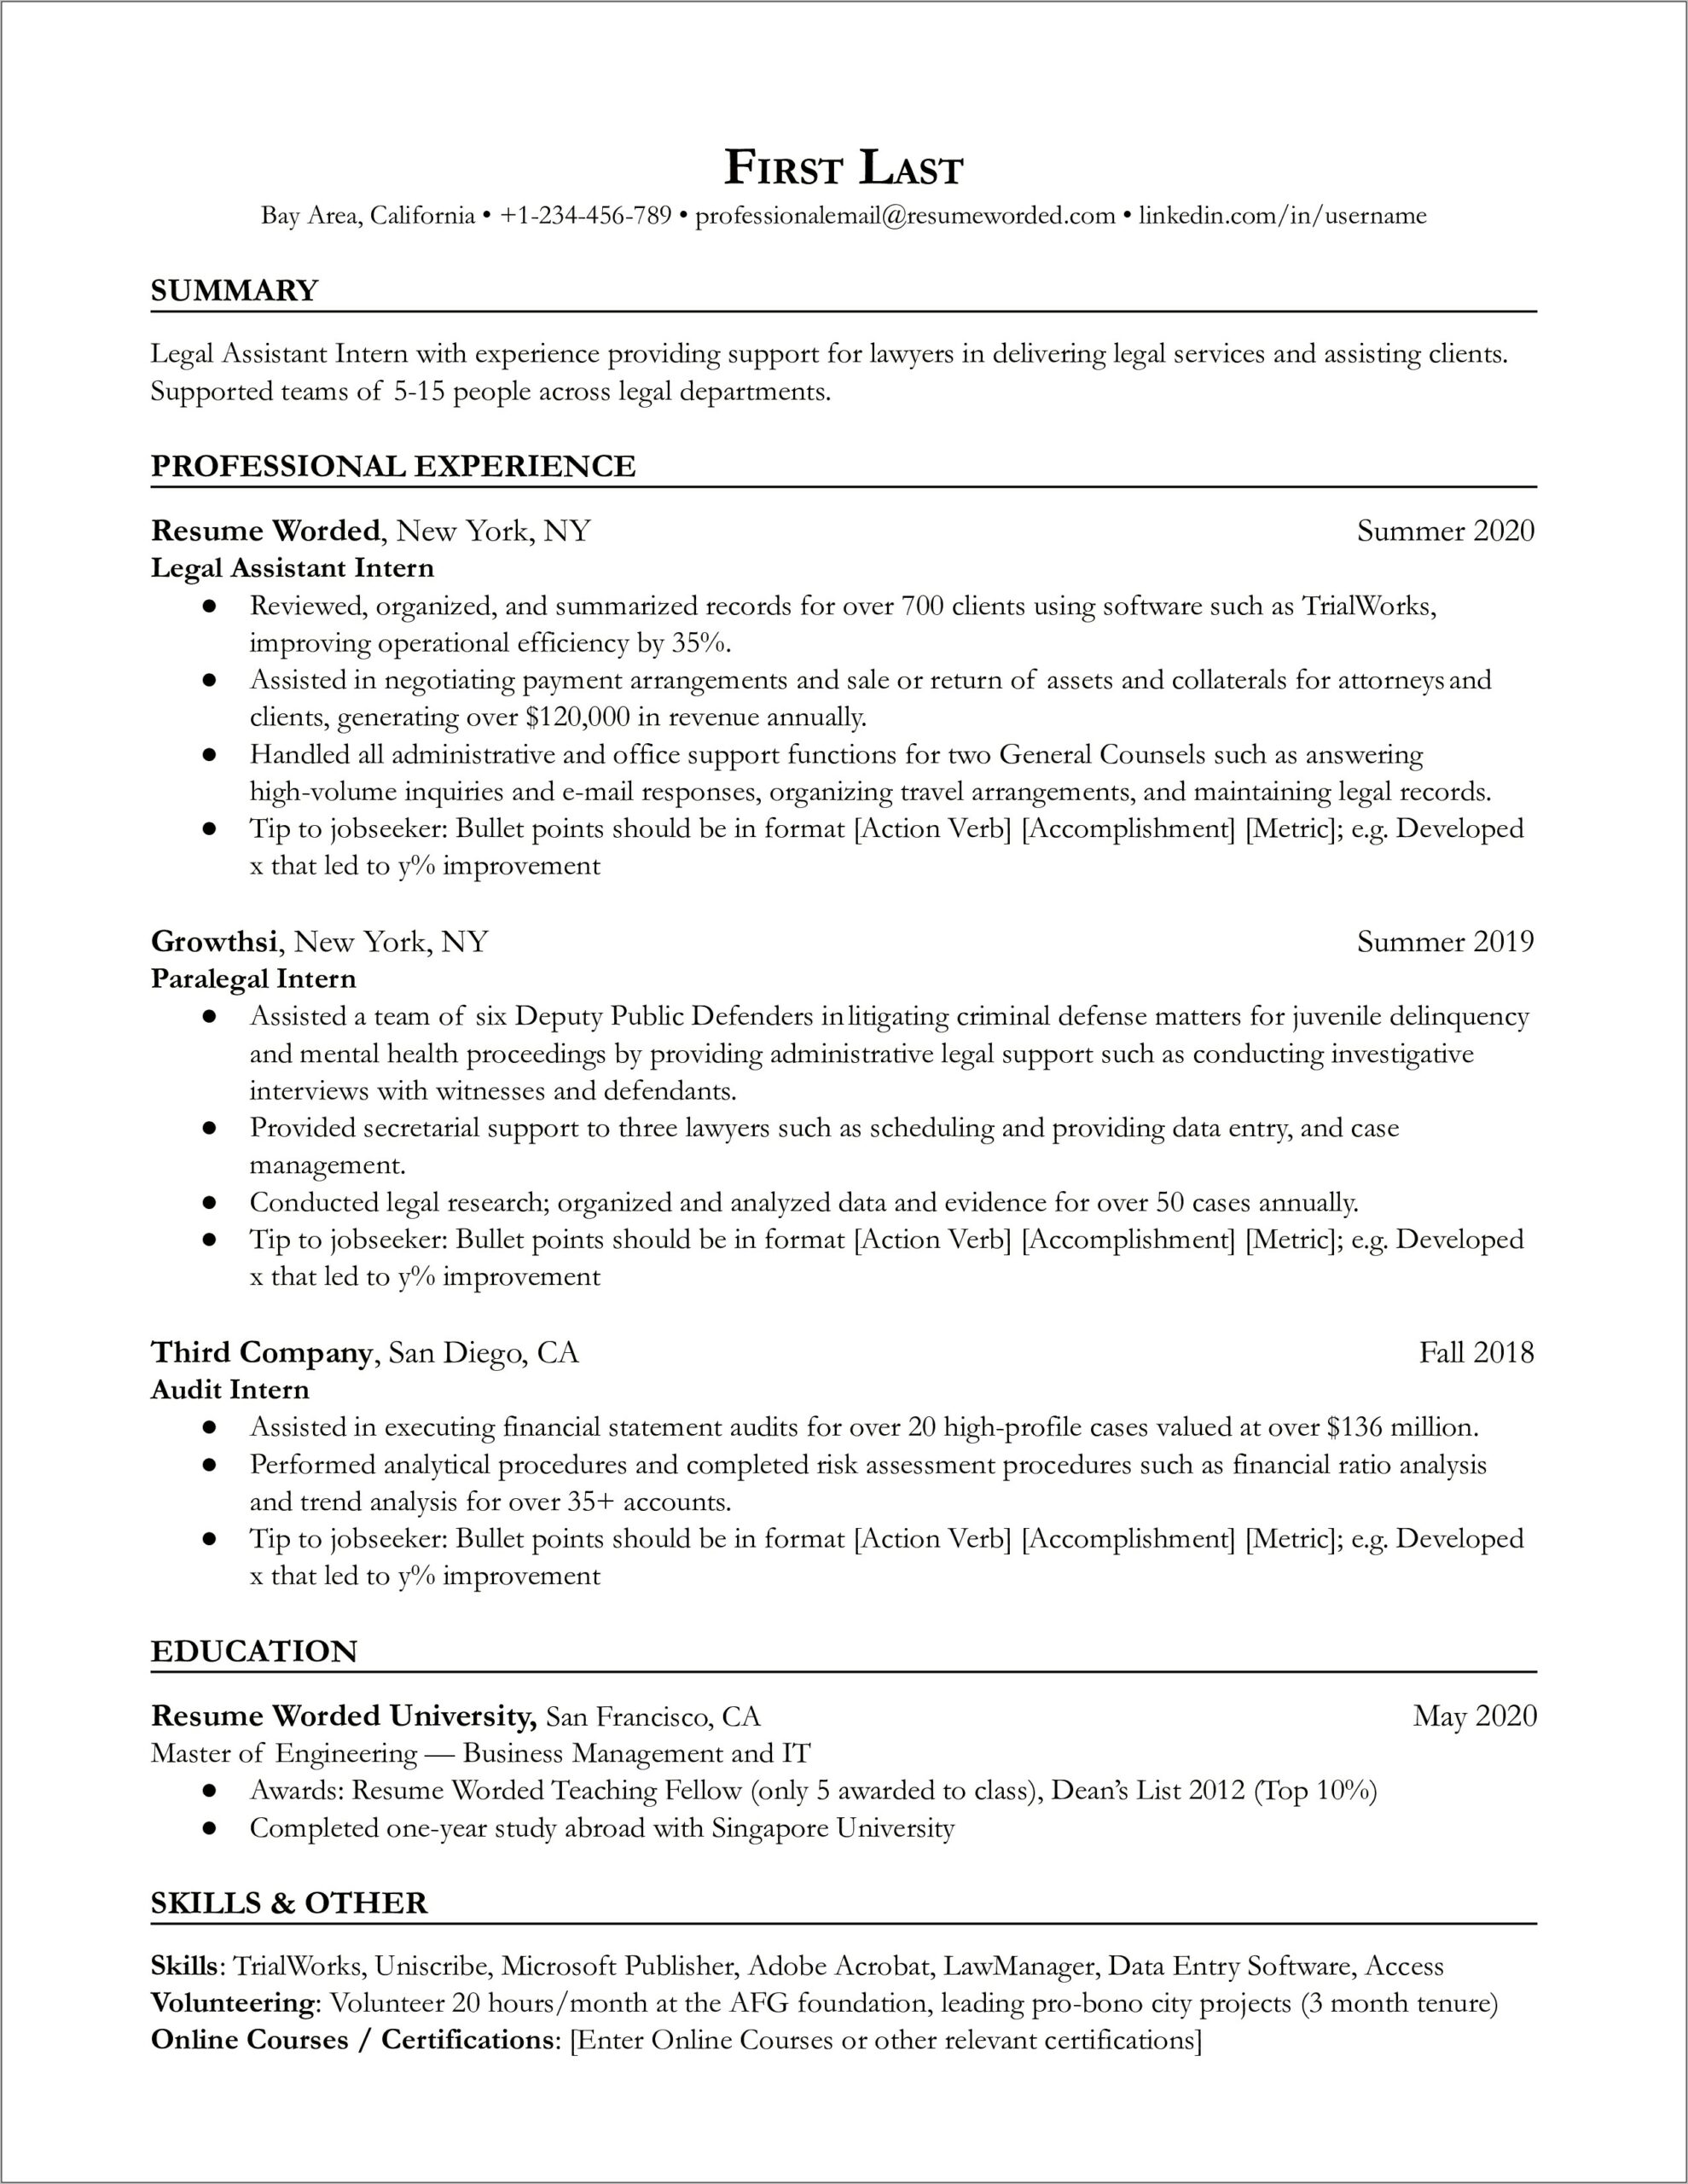 Resume Objective Paralegal Legal Assistant